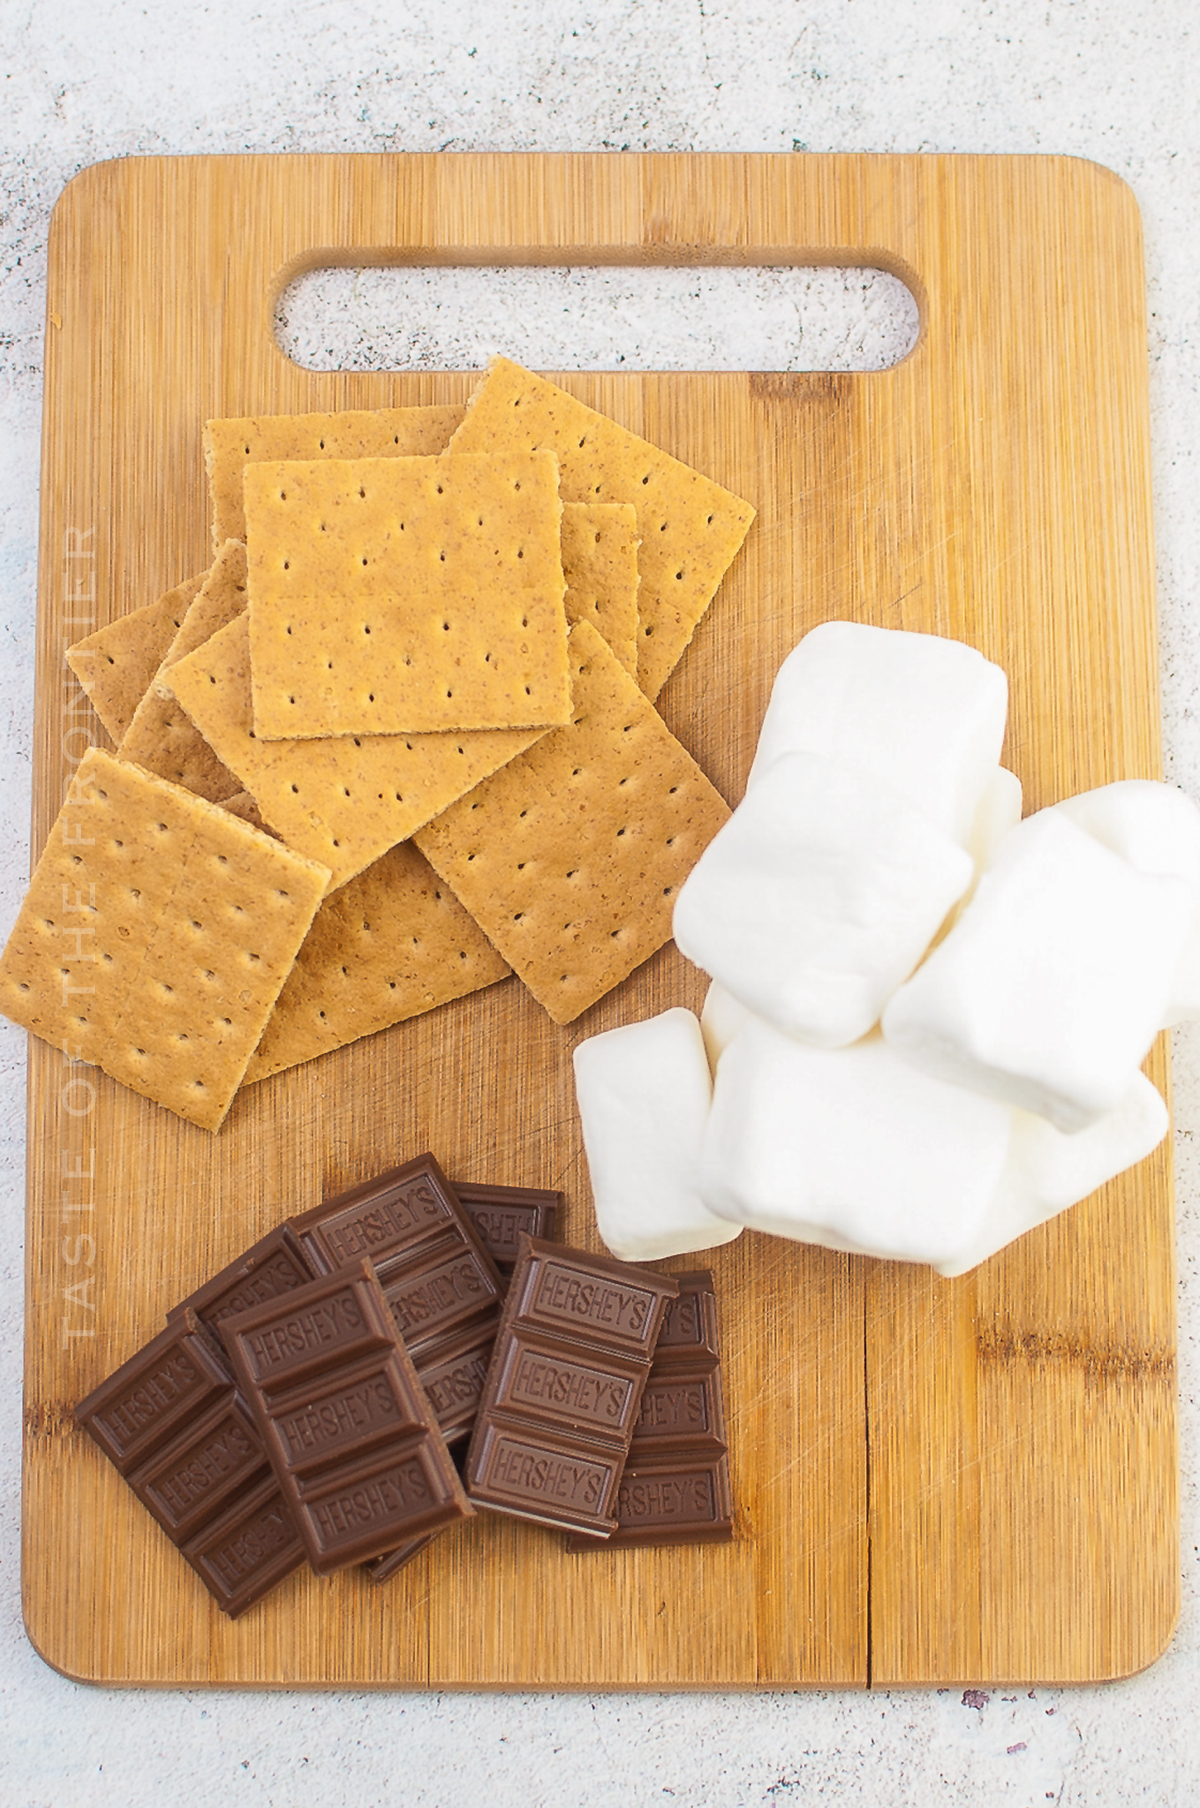 Ingredients for Air Fryer S'mores